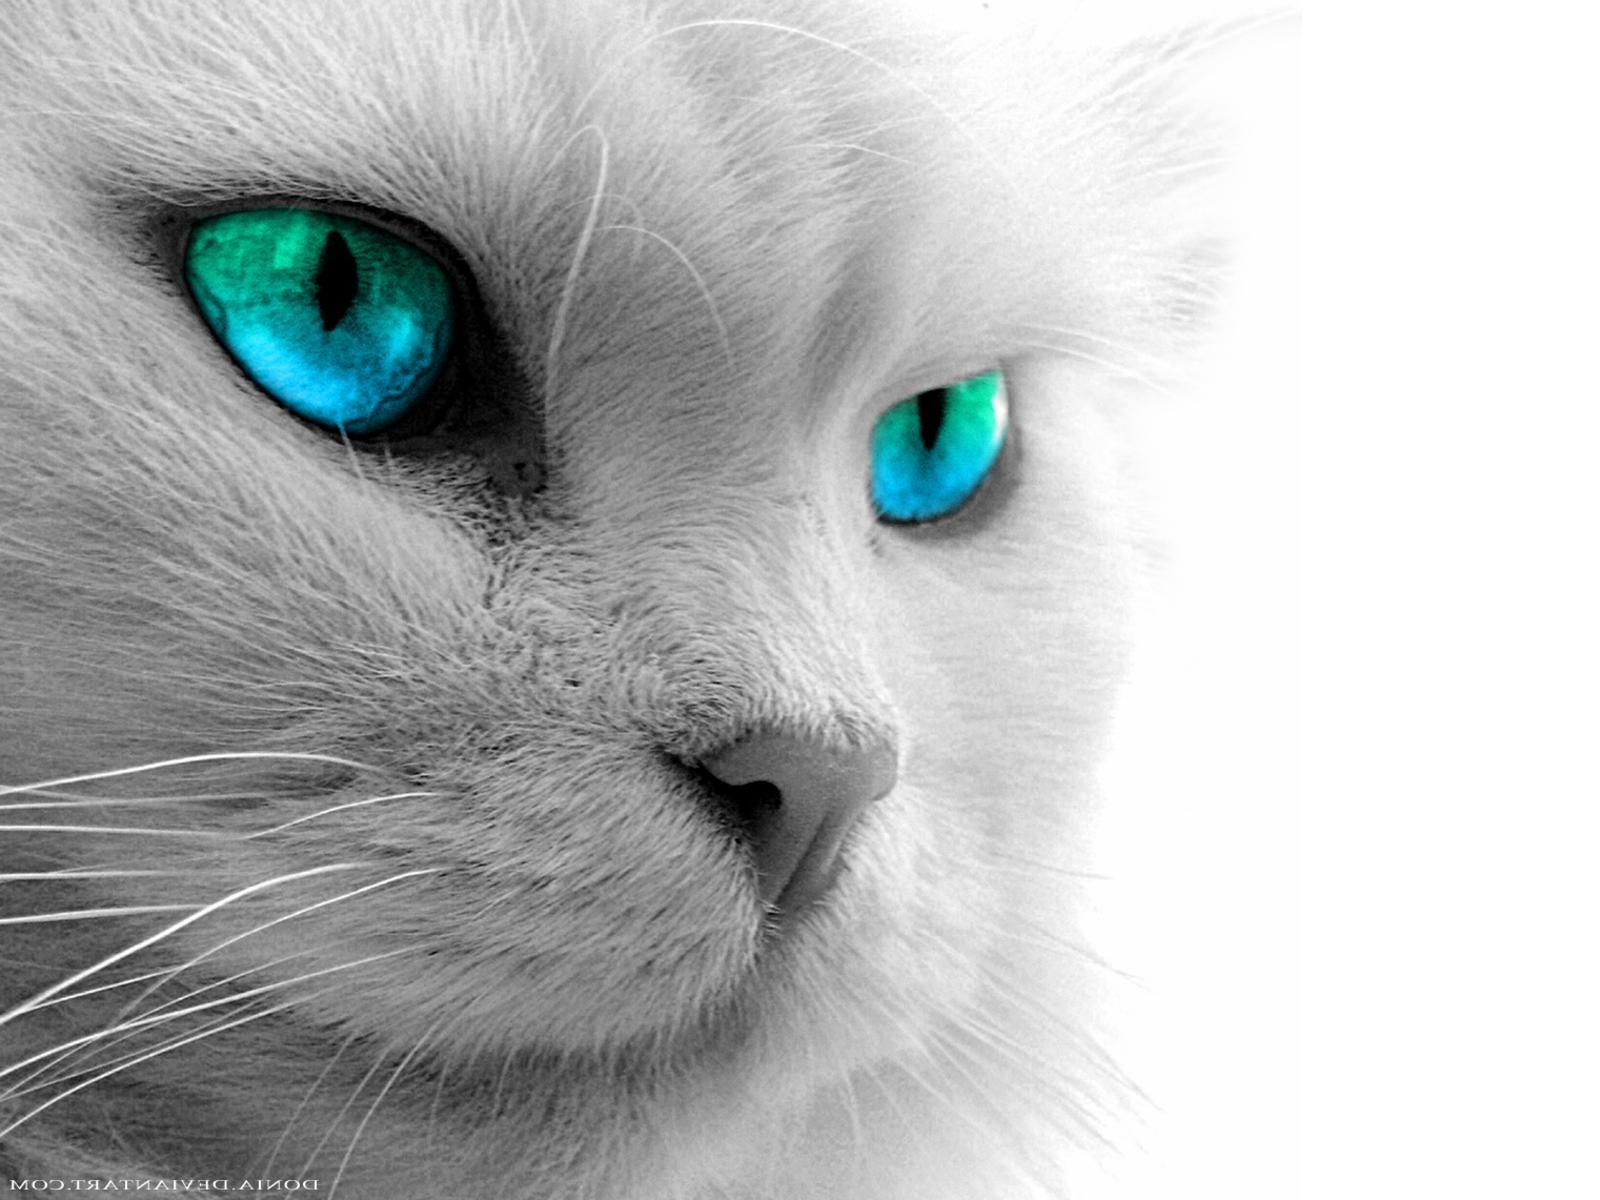  Eyes Wallpapers Blue Cat Eyes Yellow Cat Eyes Green Red Cats Eyes